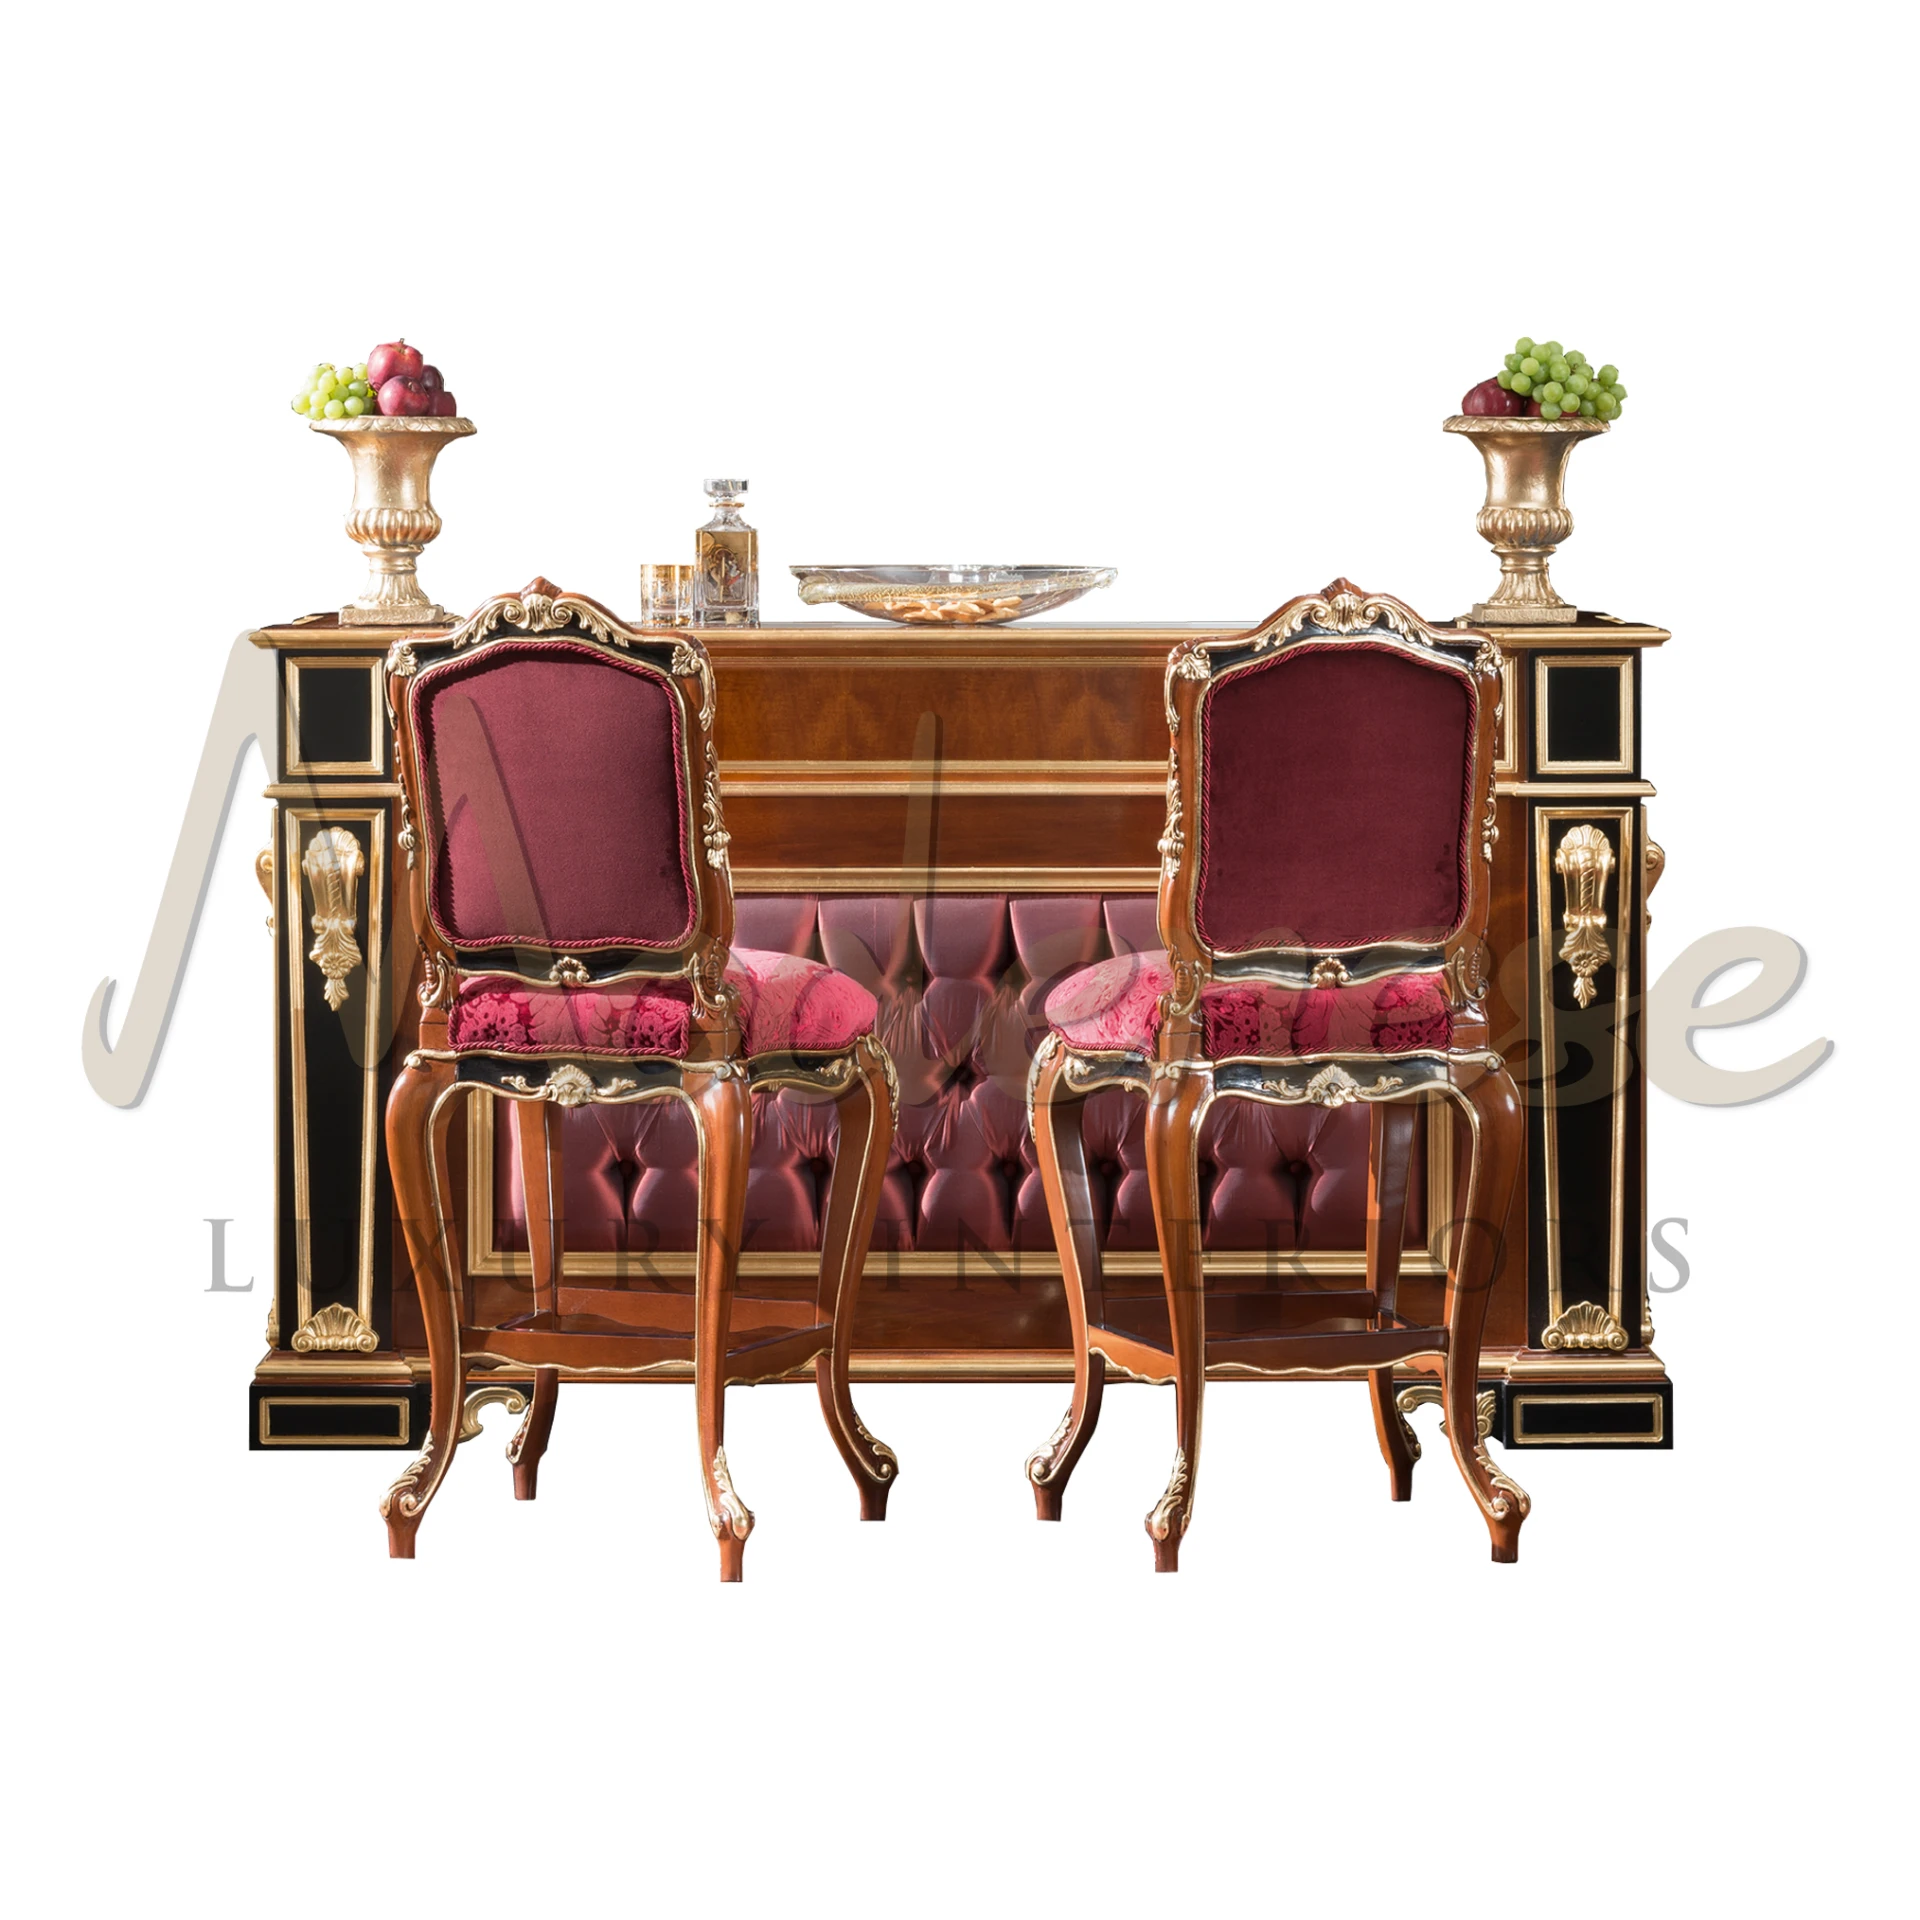 Experience true Made in Italy luxury with this cozy red bar interior. Hand-decorated with gold leaf details, upholstered front, and solid wooden structure.